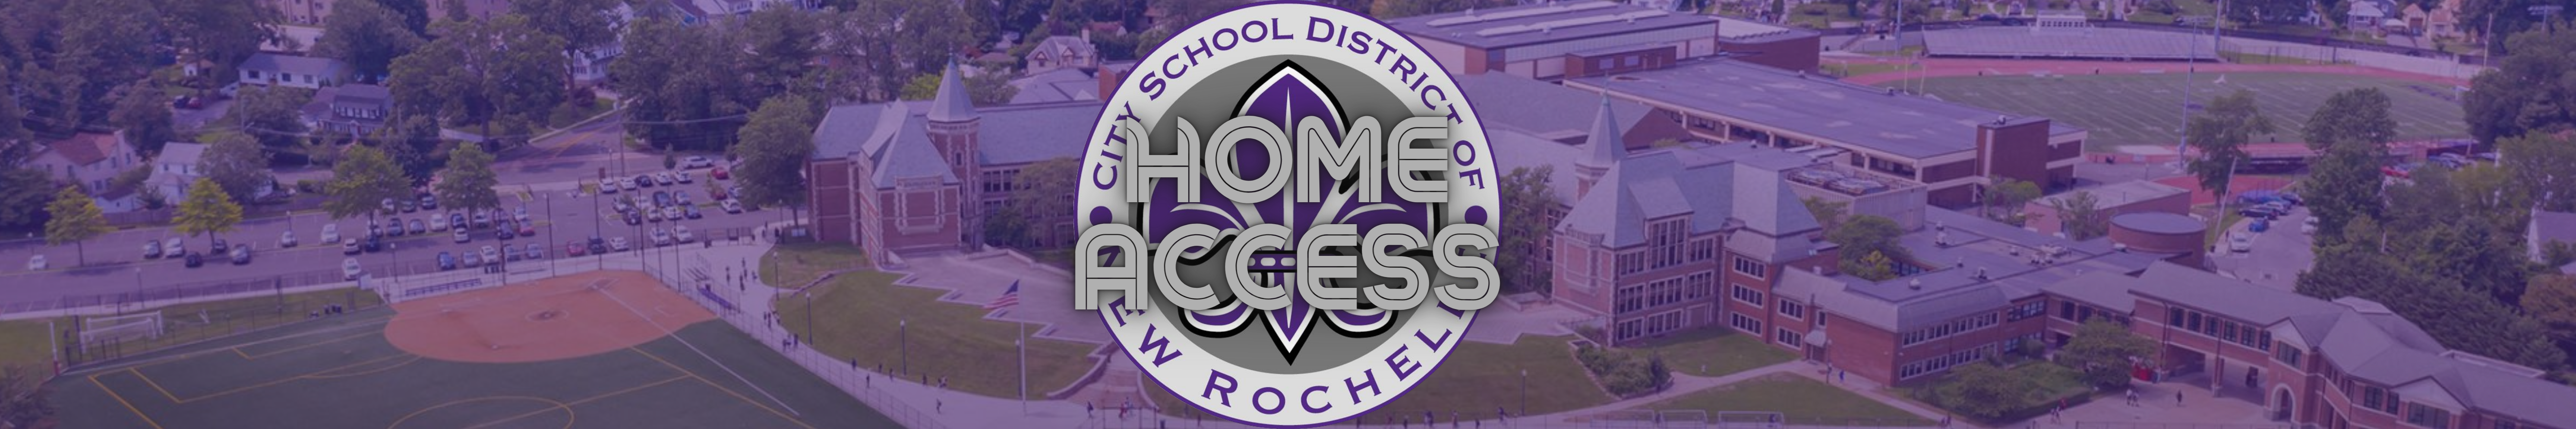 home access banner